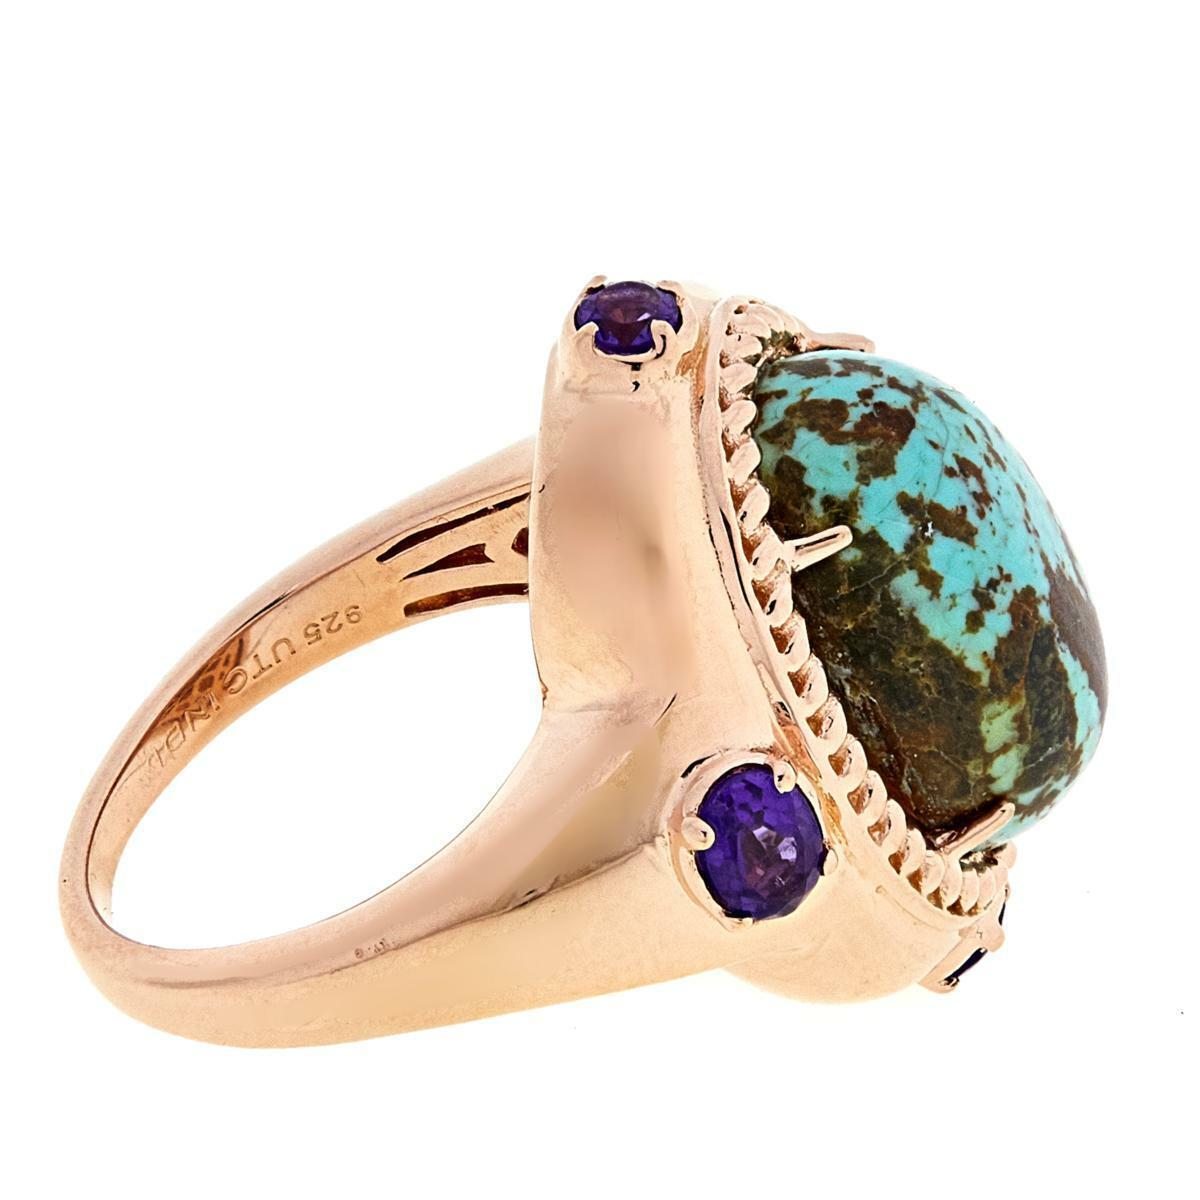 Paul Deasy Oval Turquoise and Amethyst Ring, Size 7 (374264842894)